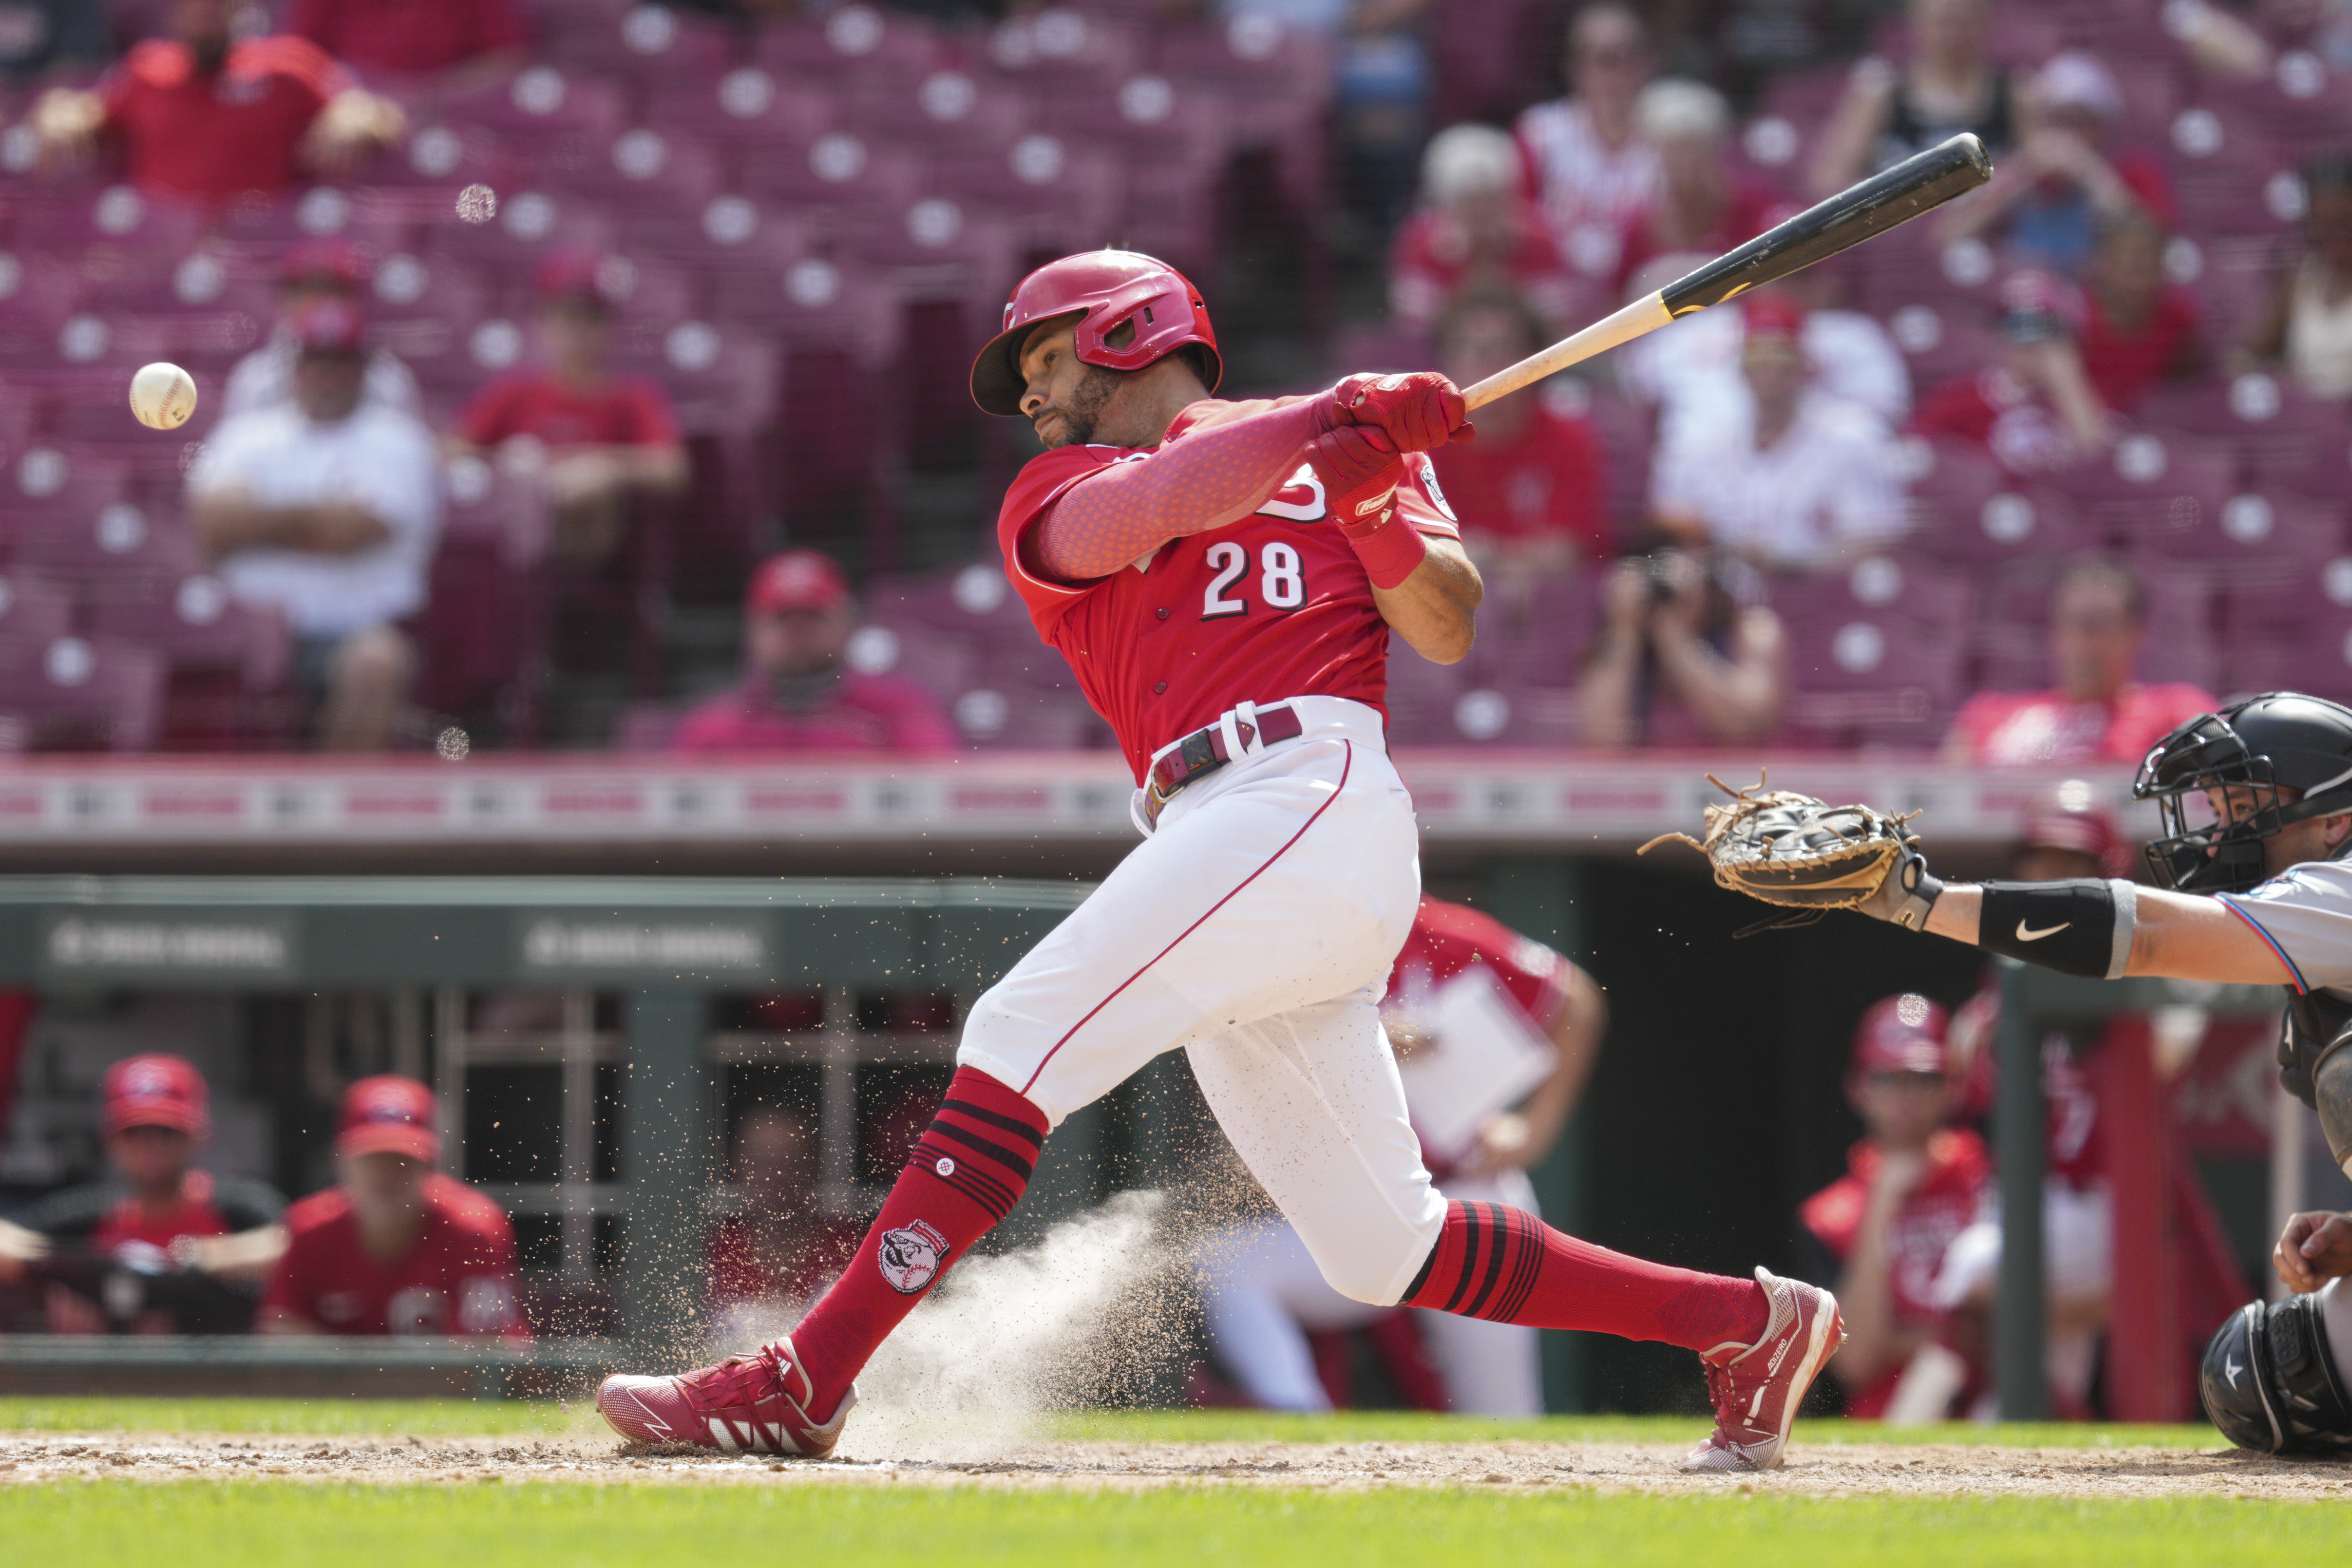 Reds trade outfielder Tommy Pham to Red Sox: Sources - The Athletic